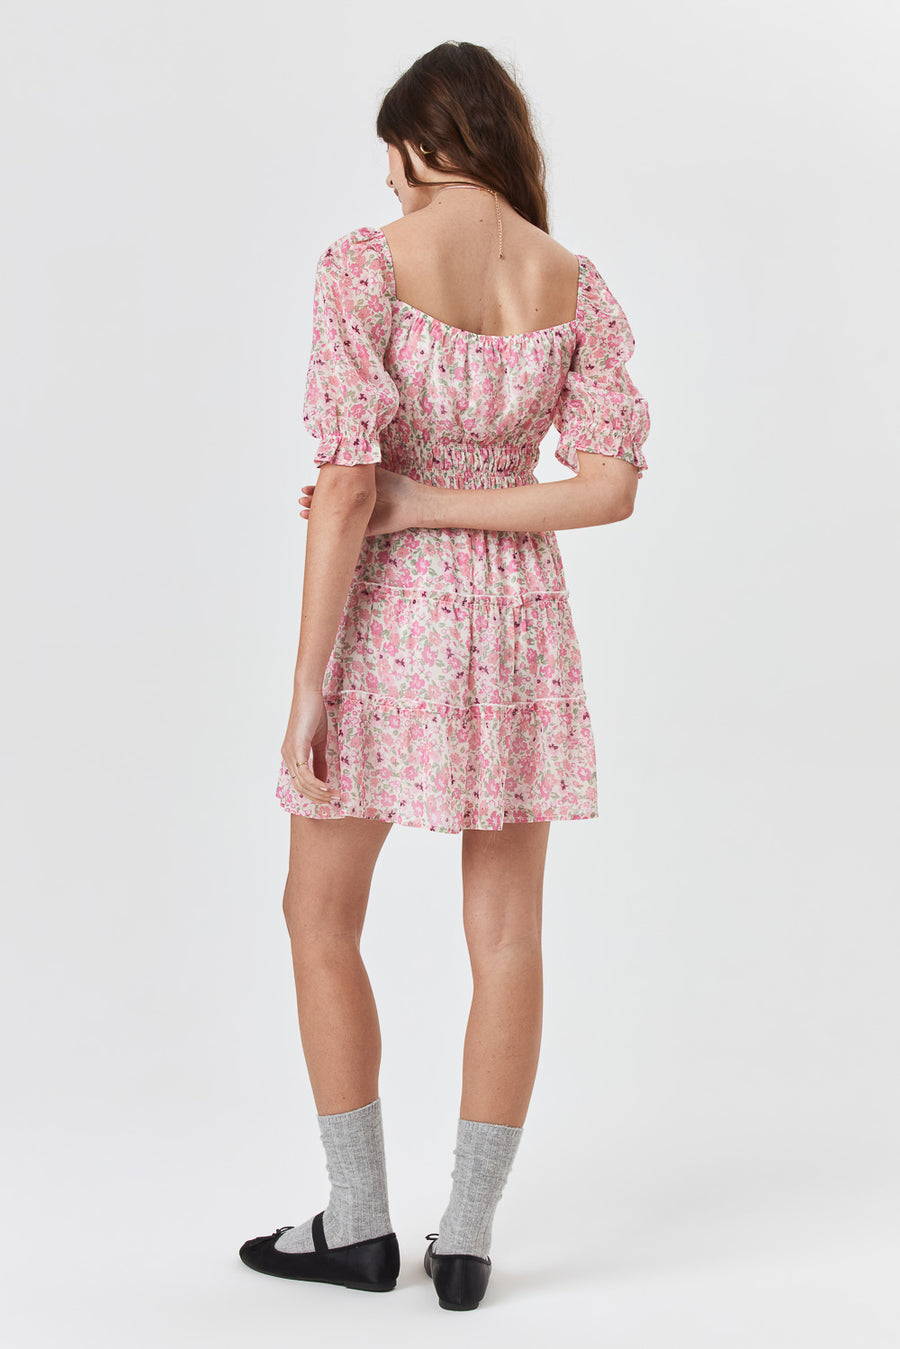 White Pink Floral Ruched Waist Tier Dress - Trixxi Clothing